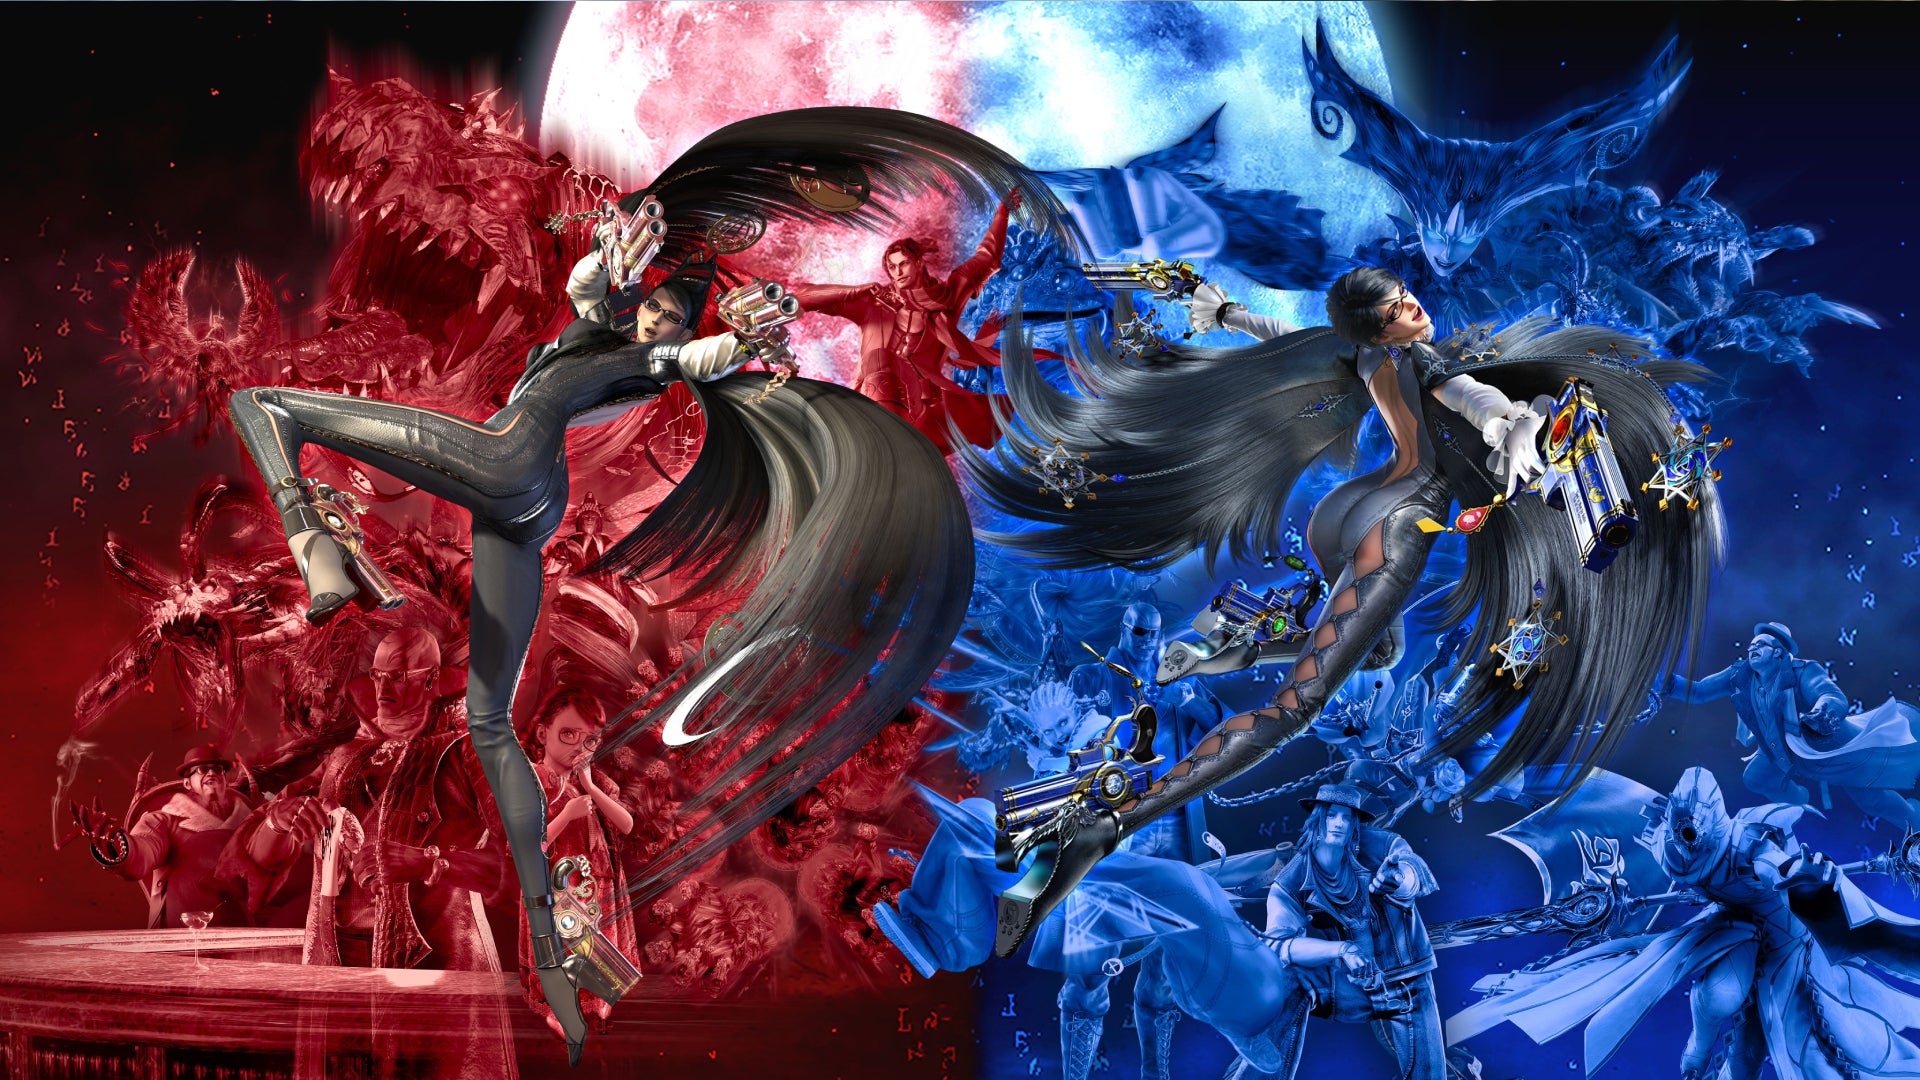 can-bayonetta-3-capture-the-magic-of-bayonetta-2-one-of-nintendo-s-greatest-ever-exclusives